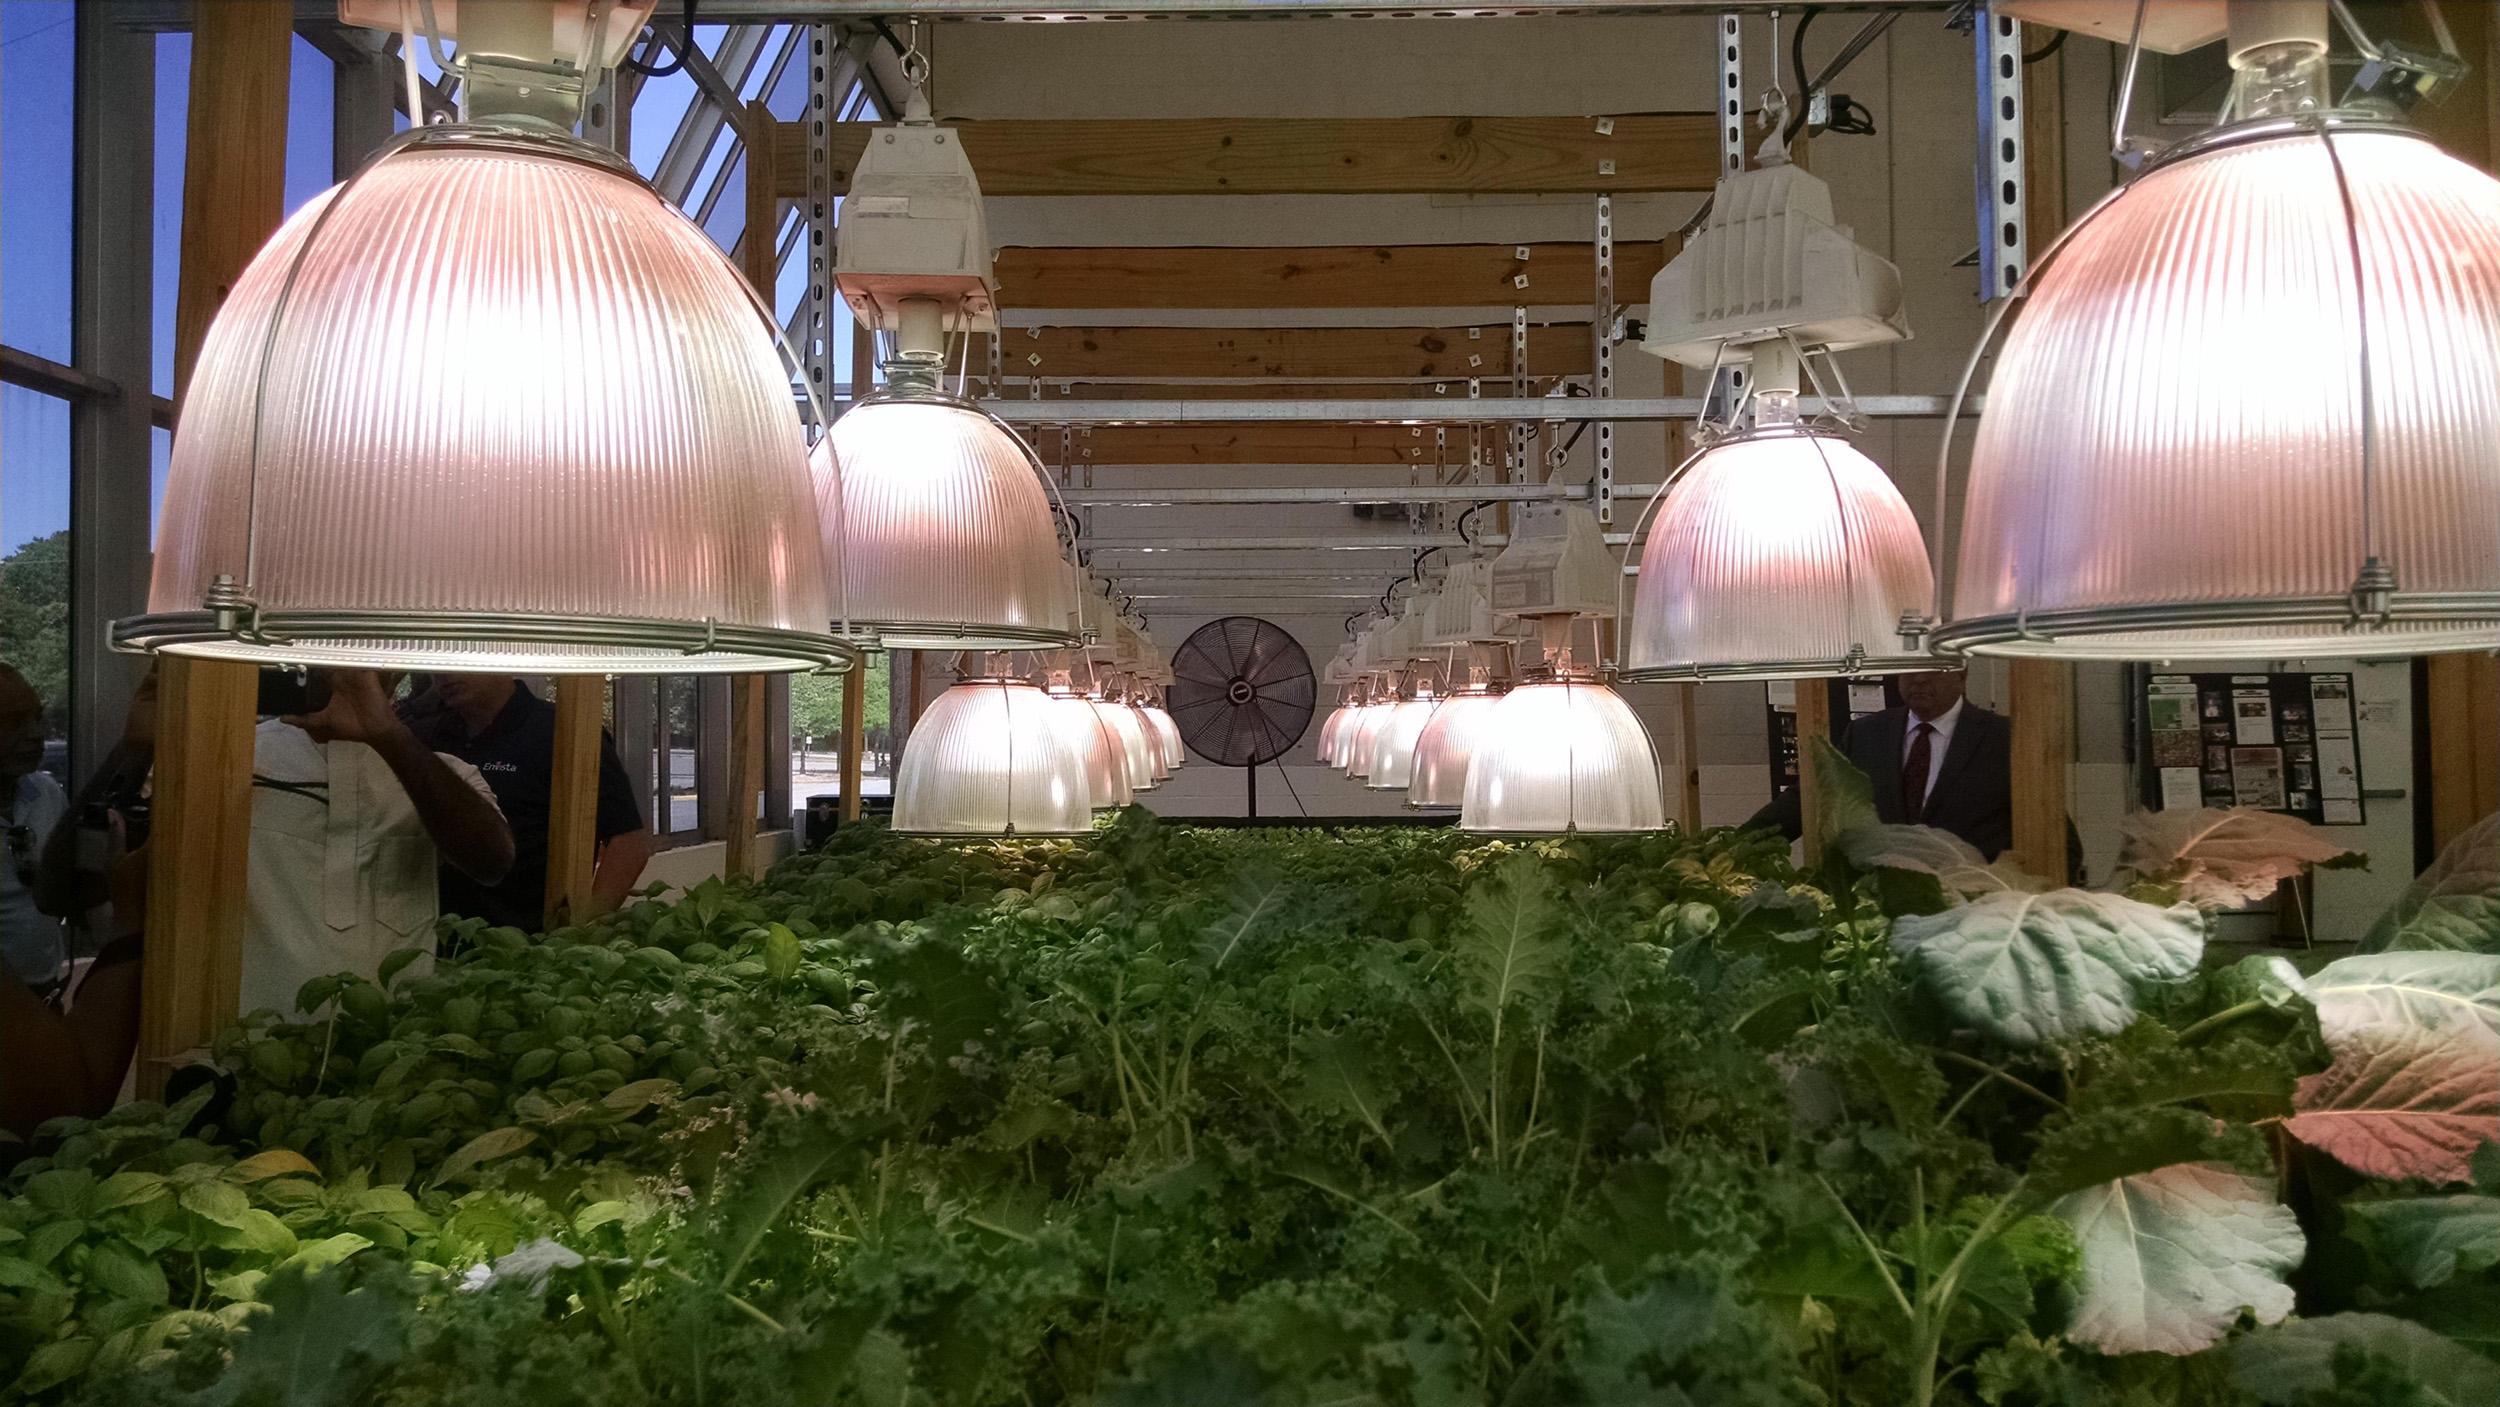 Collard greens grown hydroponically using both natural and supplemental artificial light. Image credit: Neith Little